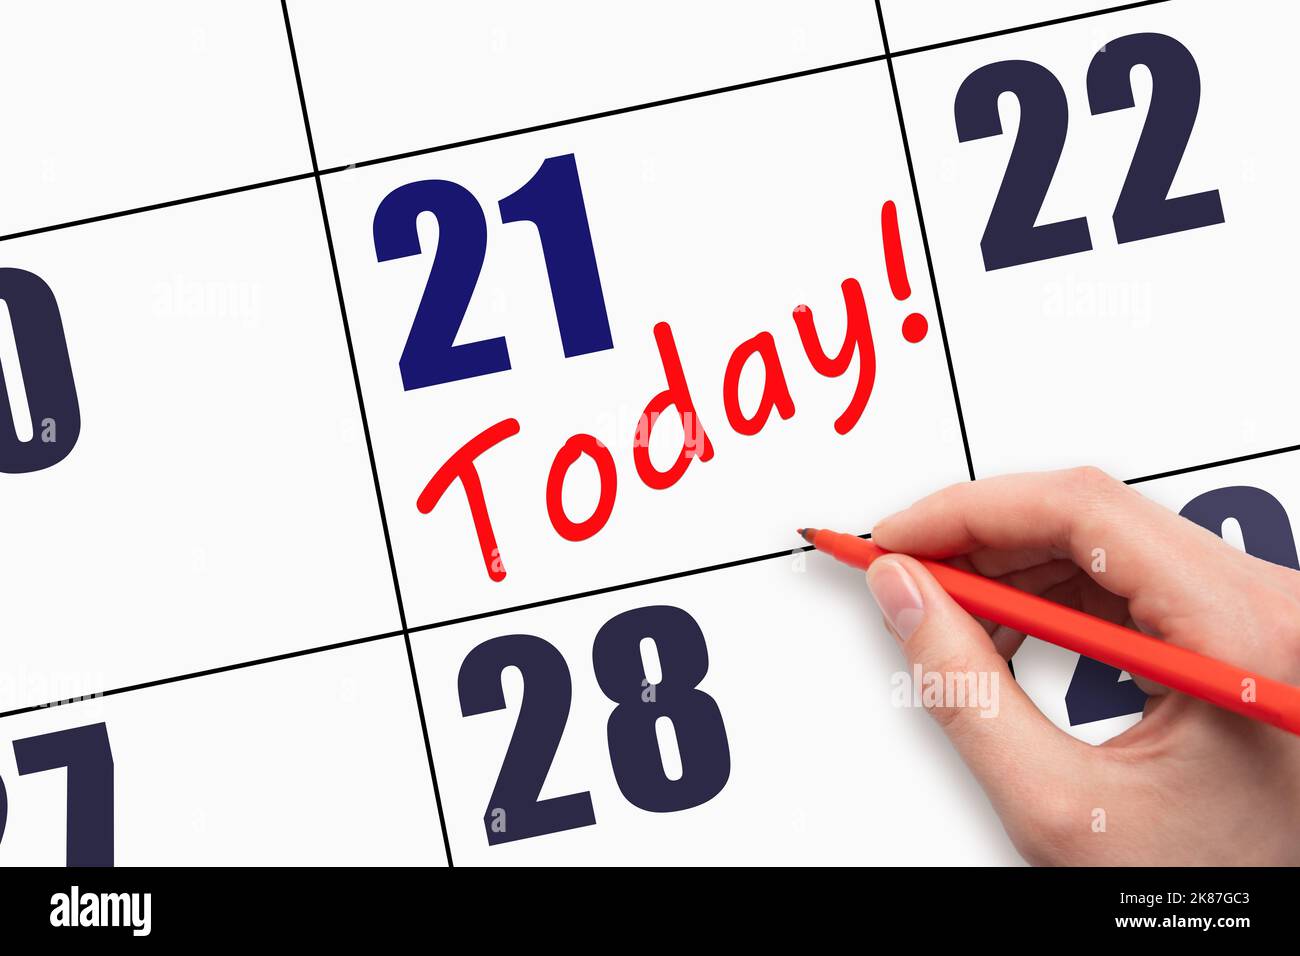 May 12nd. Day 12 Of Month, Calendar Date. The Hand Holds A Black Pen And  Writes The Calendar Date. Spring Month, Day Of The Year Concept Stock  Photo, Picture and Royalty Free